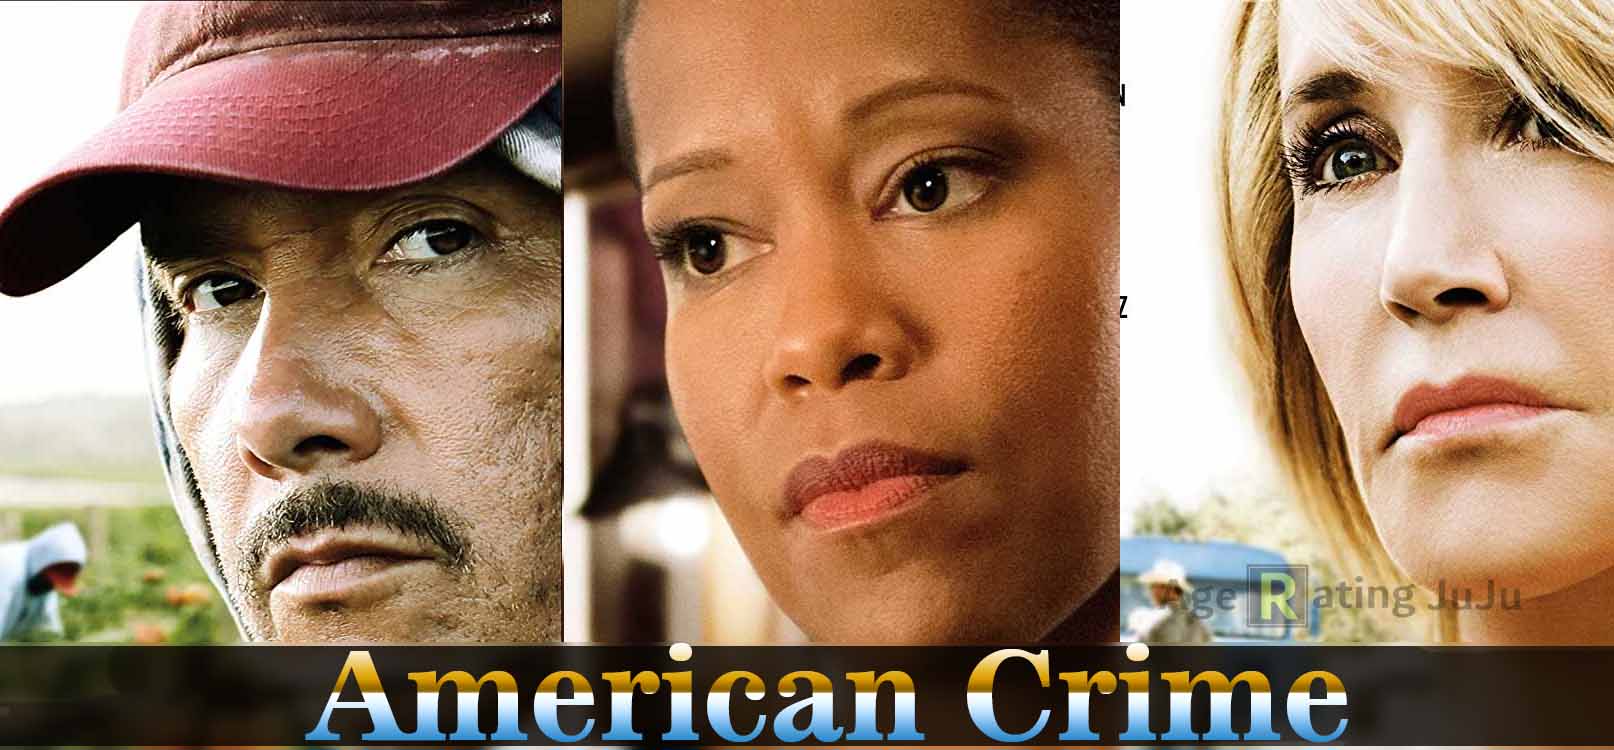 American Crime Age Rating 2018 - TV Show Netflix Poster Images and Wallpapers